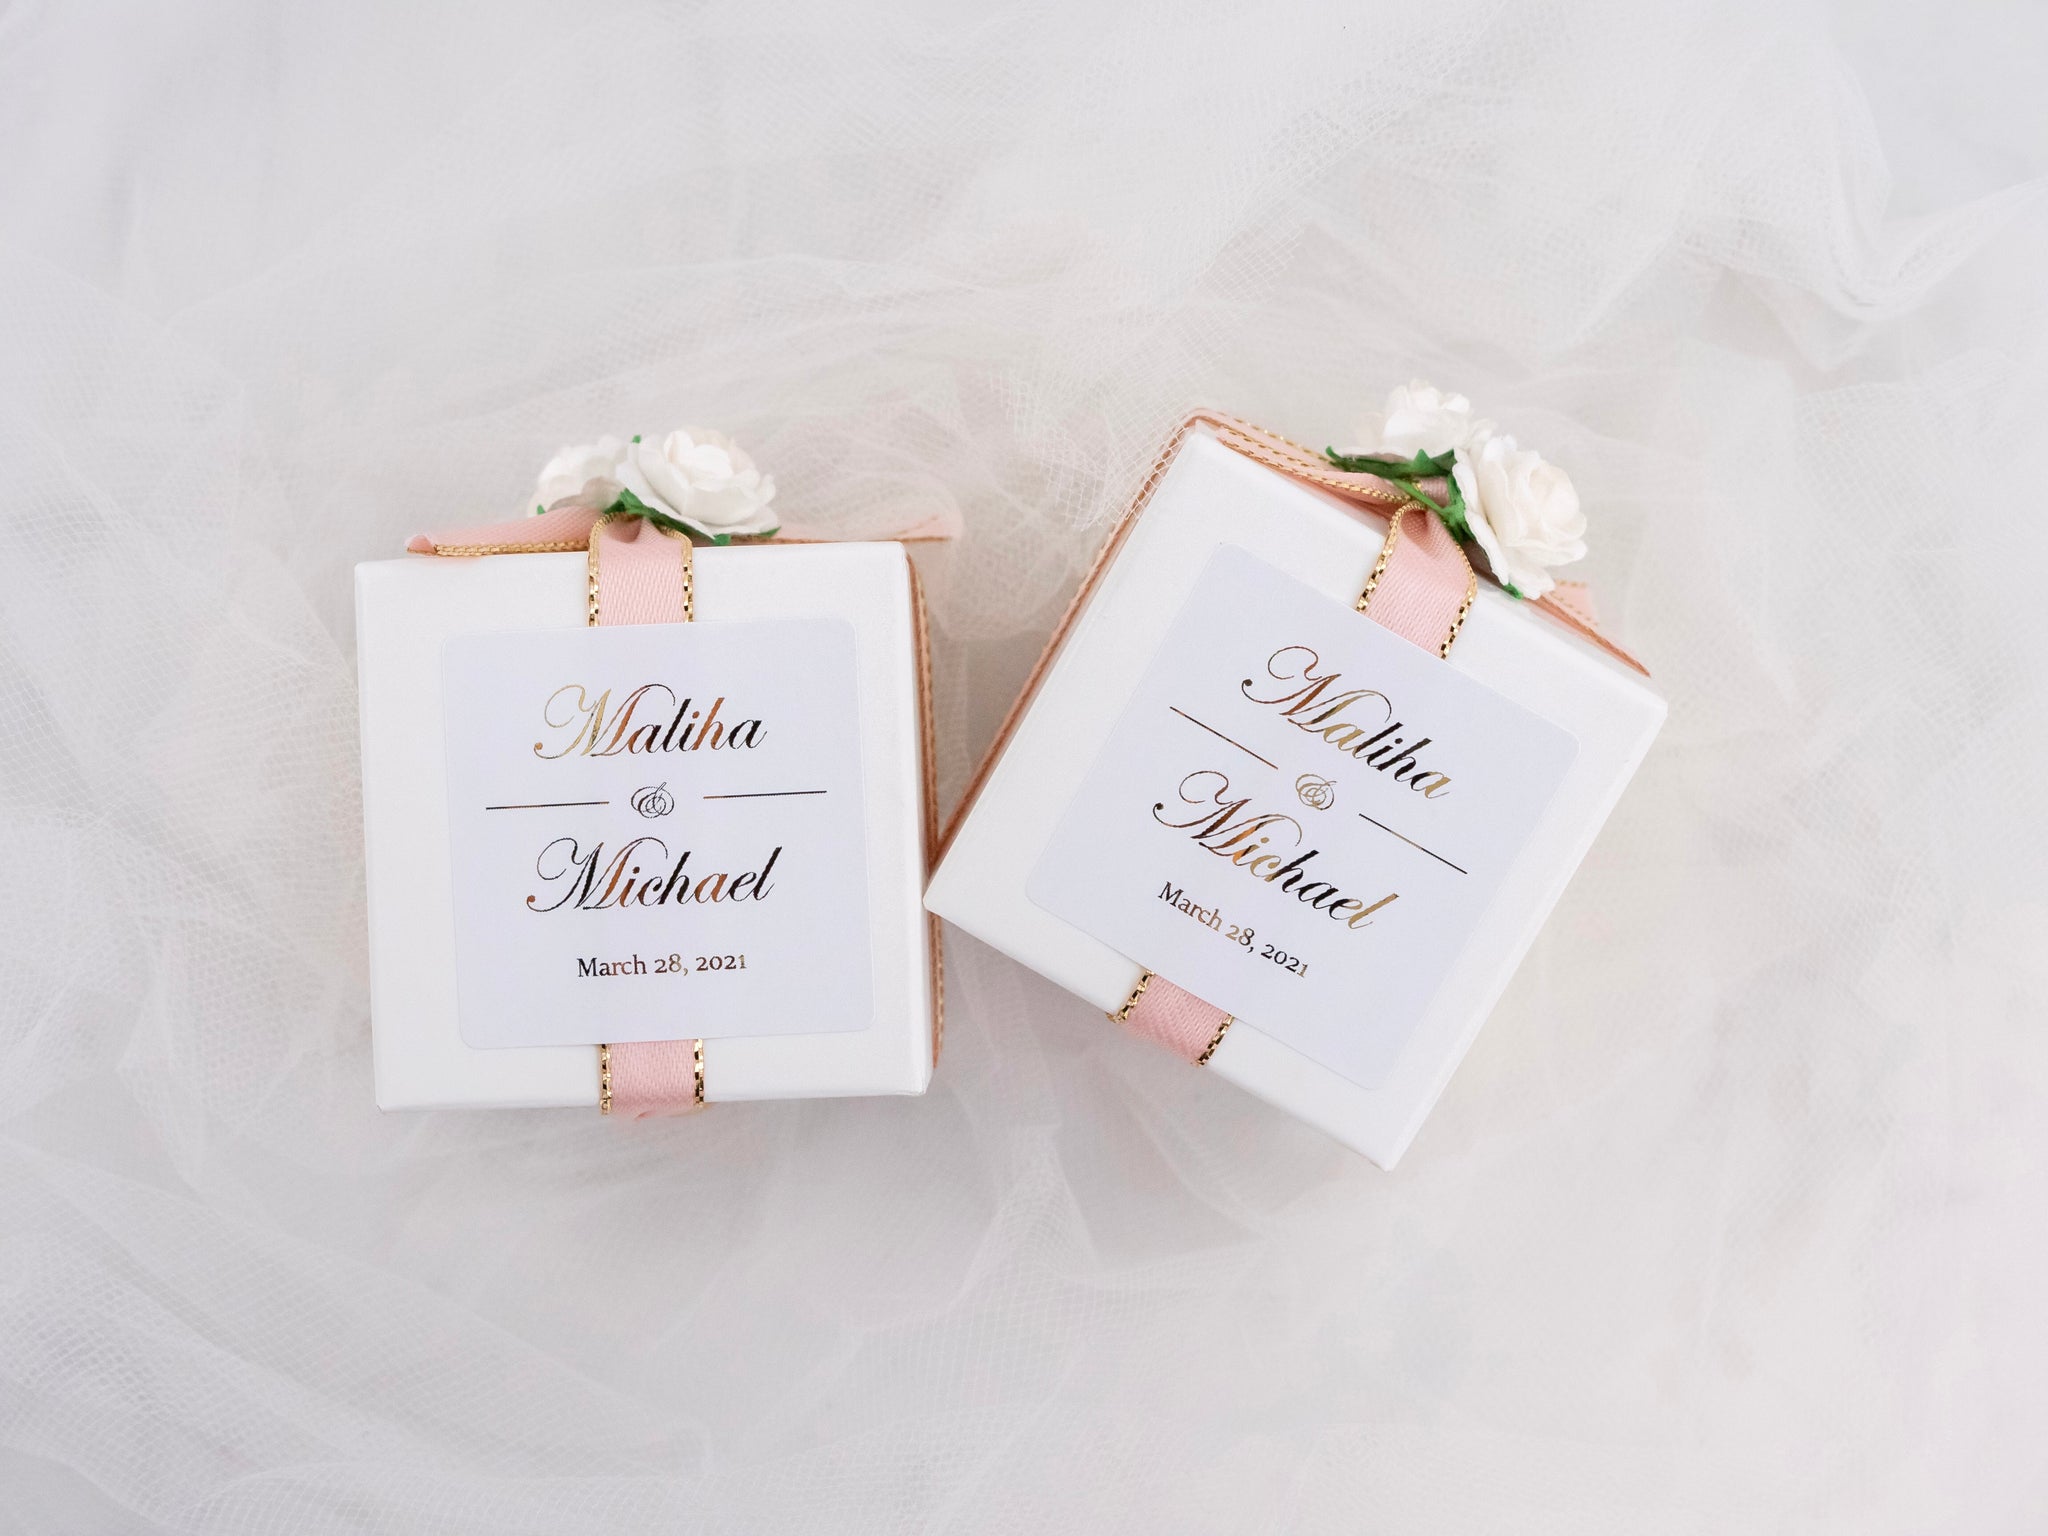 We Did Our First Wedding Favors!